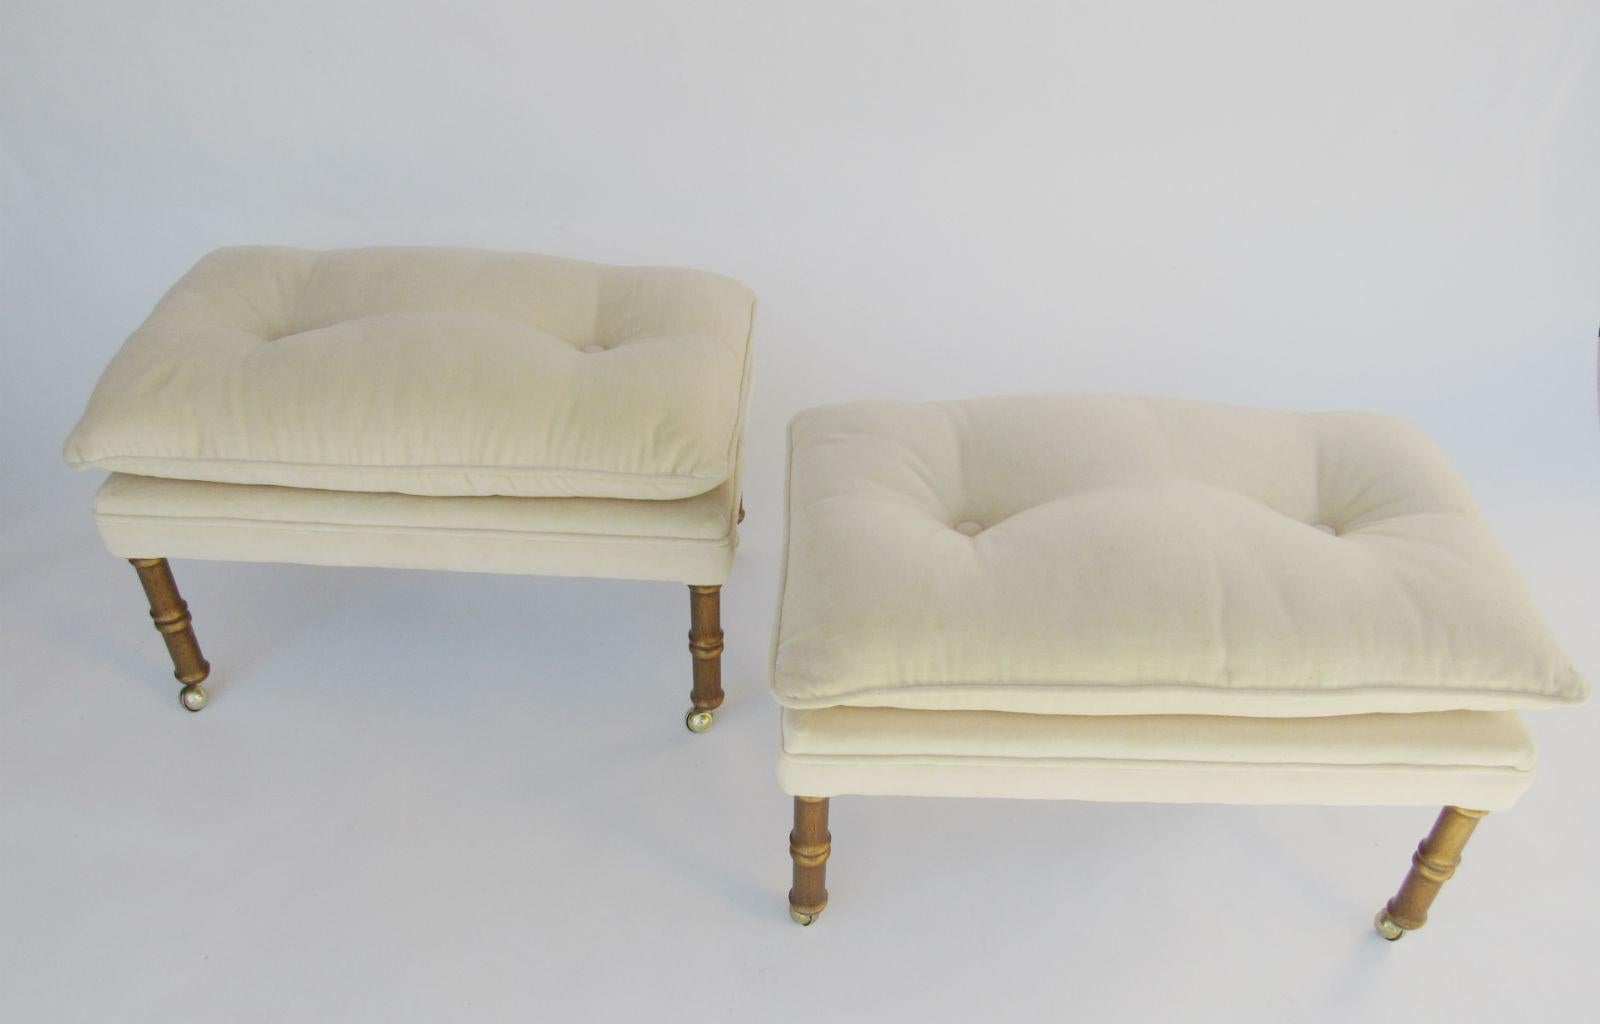 Painted Pair of Gilded Mid-Century Modern Faux Bamboo Benches or Stools, 1970s